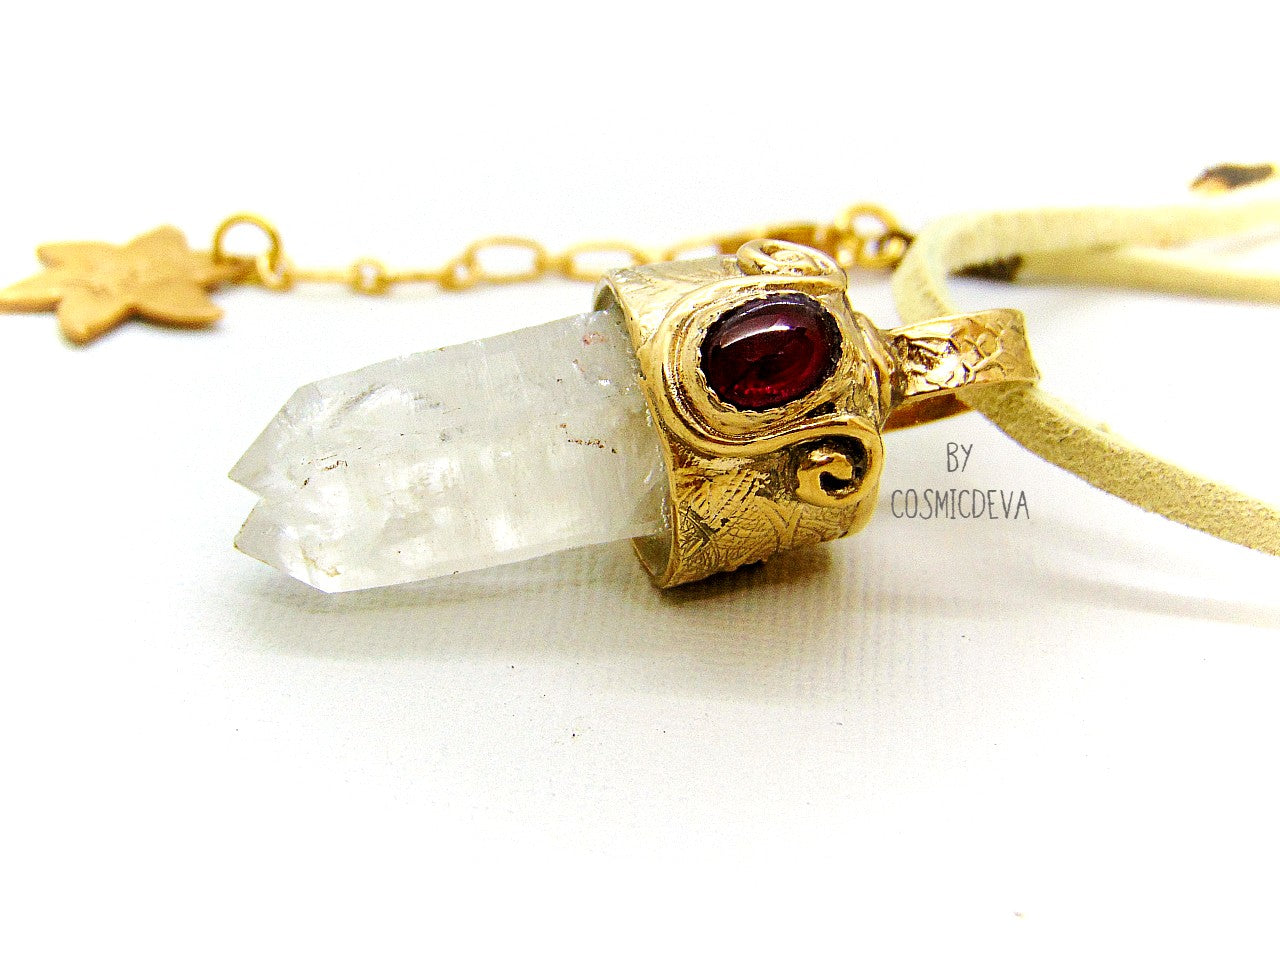 One of a kind completely hand sculptured gold bronze pendant with clear natural twin pointed crystal quartz wand and a lovely red ruby setting. A textured spirit animal dolphin is shown on the backside of the gold bronze pendant. Twin pointed crystals also known as soulmate crystals are two points one body, representing co- in-joined twins or entwined souls. Carry and meditate on a piece of twin pointed quartz to attract your soulmate.